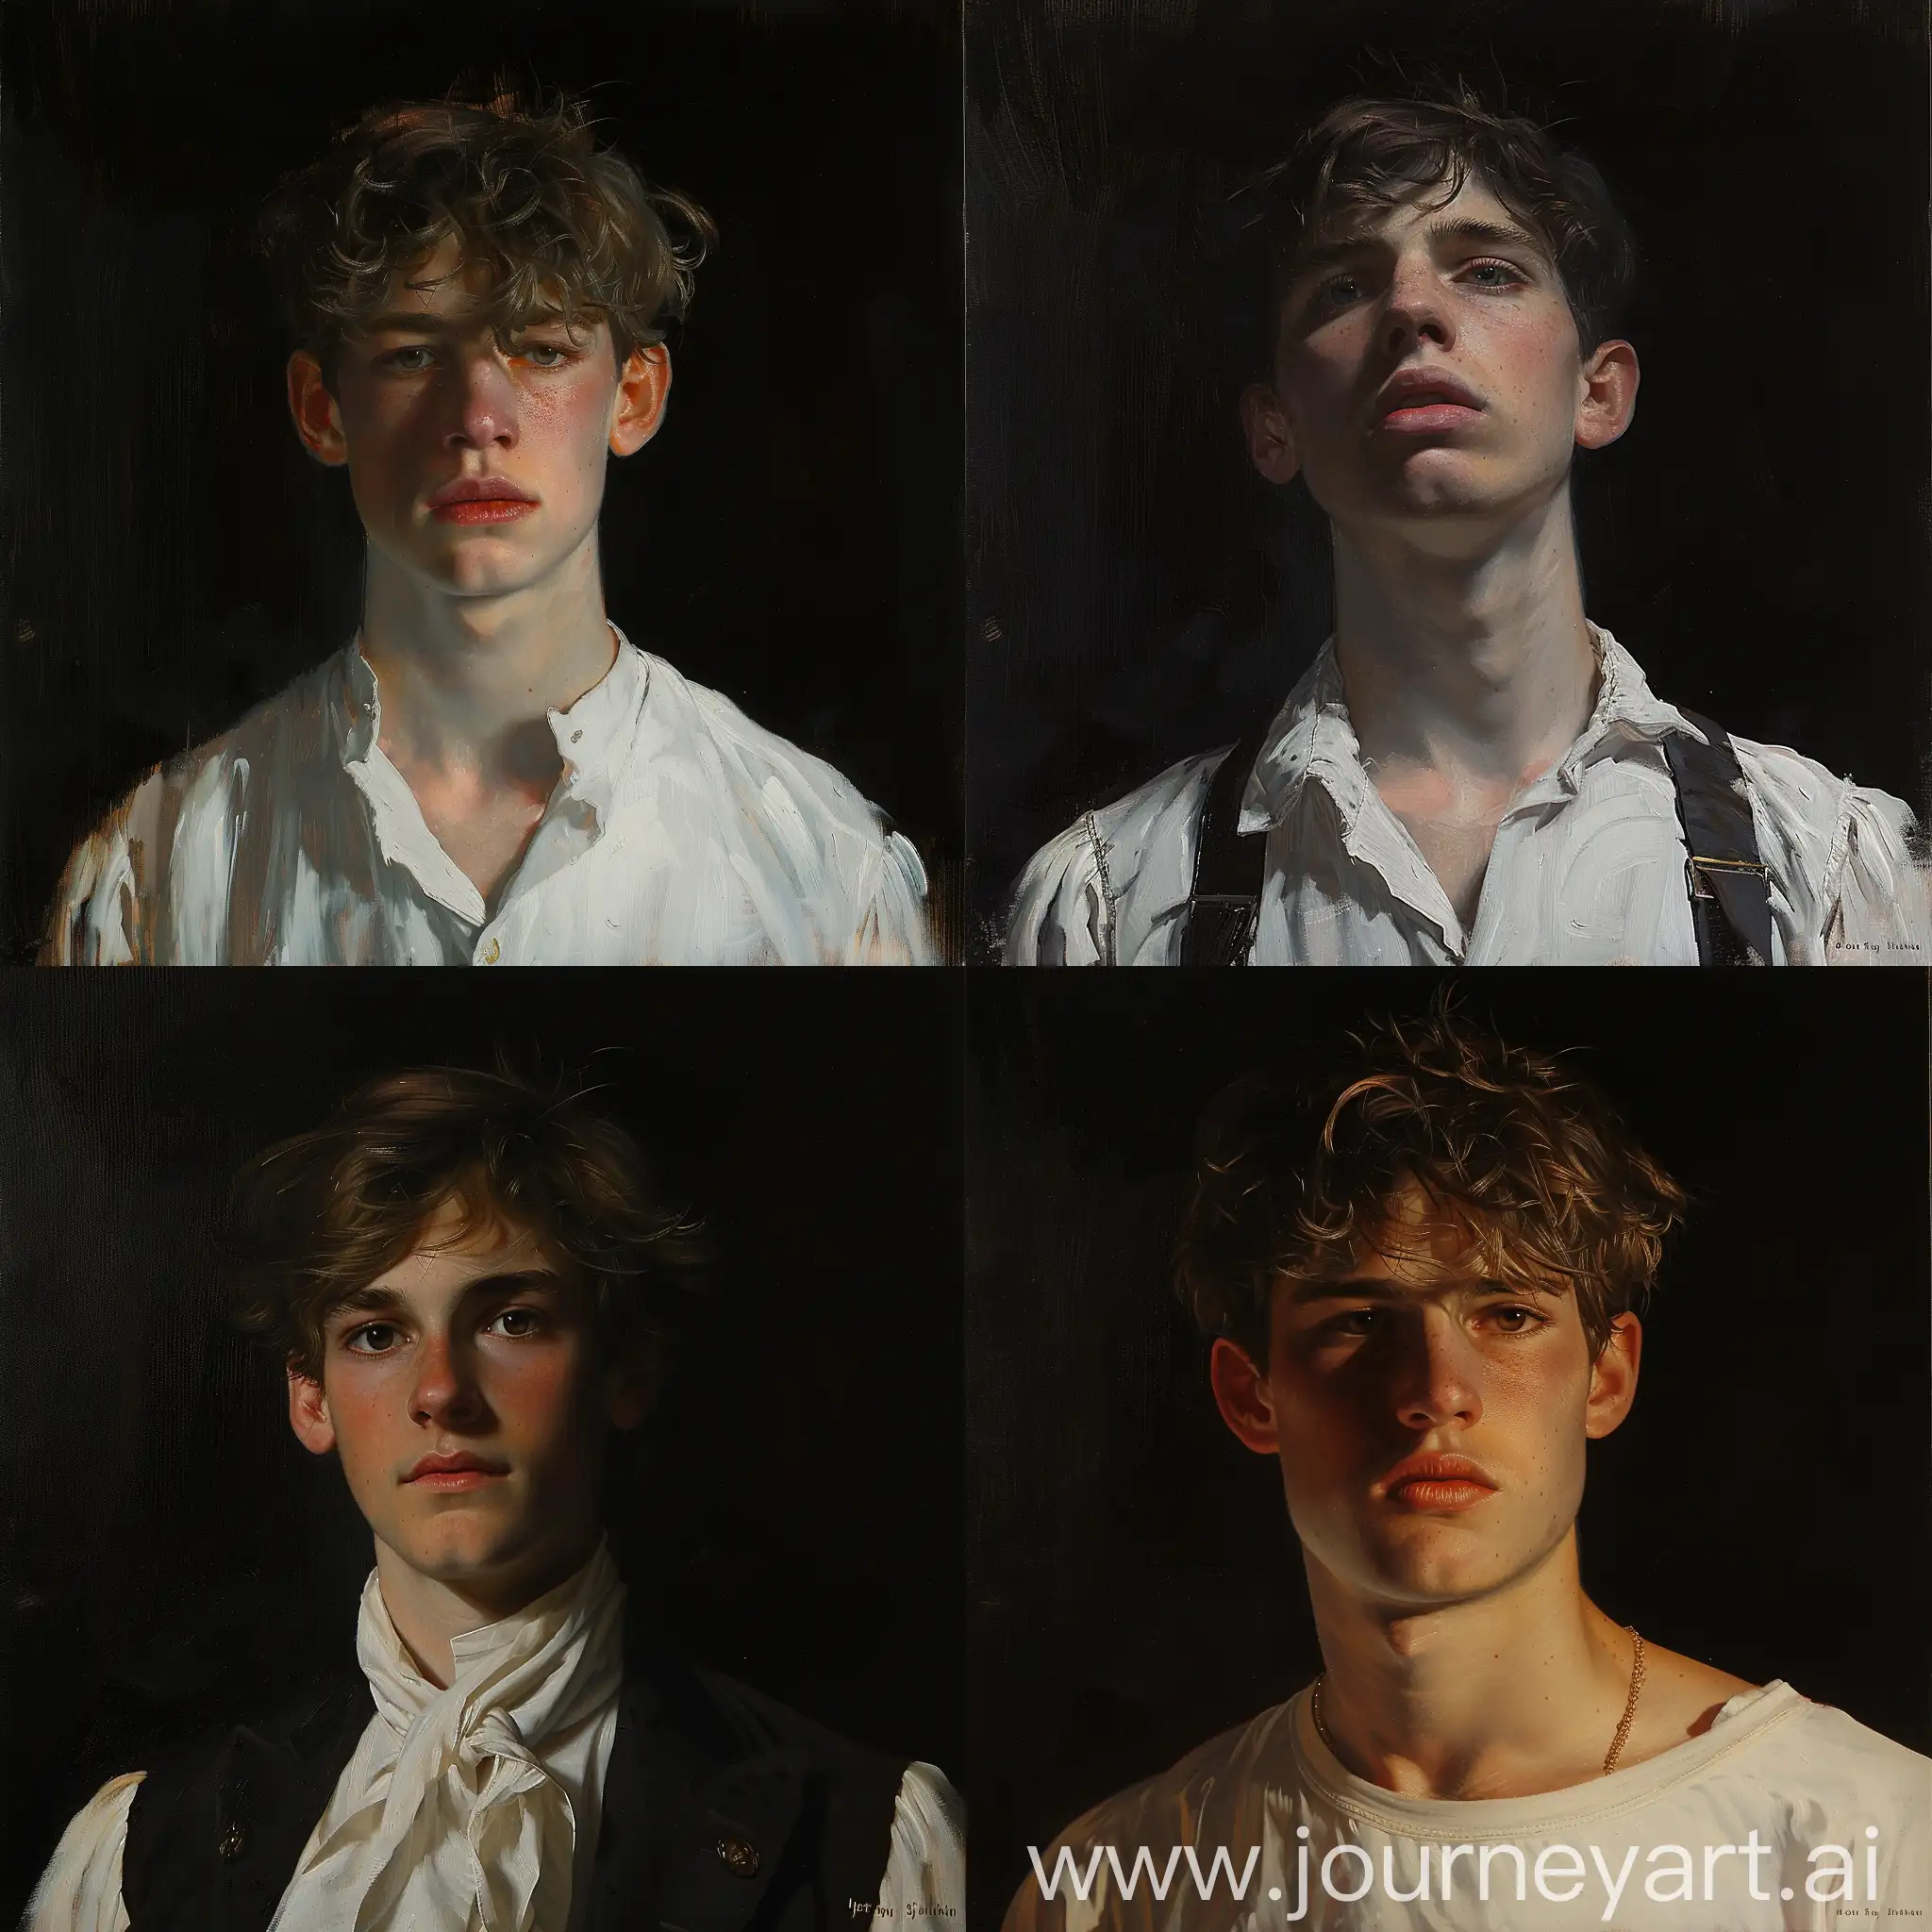 a painting of a young man, wlop John singer Sargent, jeremy lipkin and rob rey, range murata jeremy lipking, John singer Sargent, black background, jeremy lipkin, lensculture portrait awards, casey baugh and james jean, detailed realism in painting, award-winning portrait, amazingly detailed oil painting 